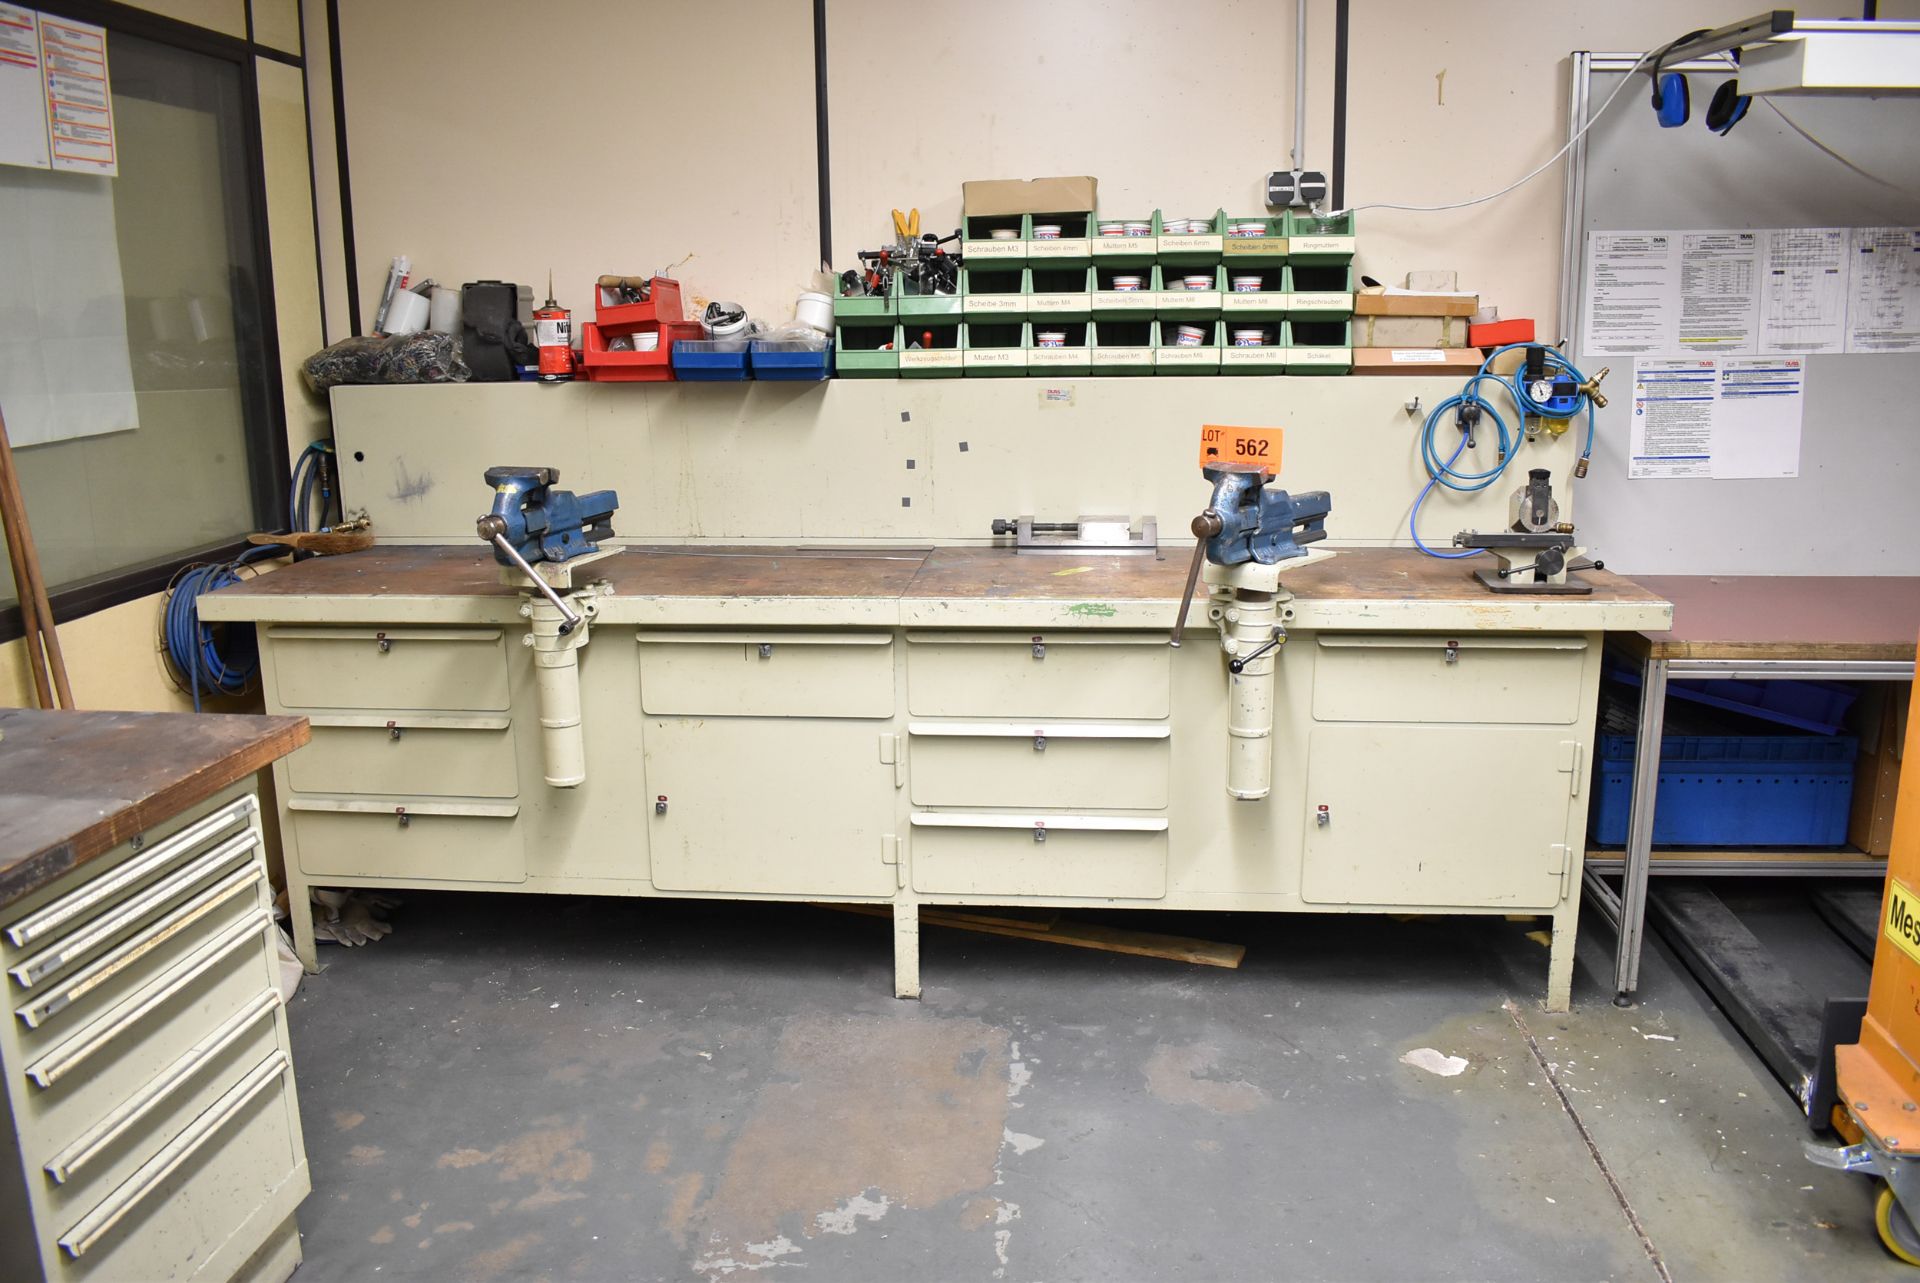 LOT/ WORKBENCHES AND TOOL CABINETS WITH CONTENTS AND (2) 120 MM VISES, S/N N/A (BAU 57) [Removal Fee